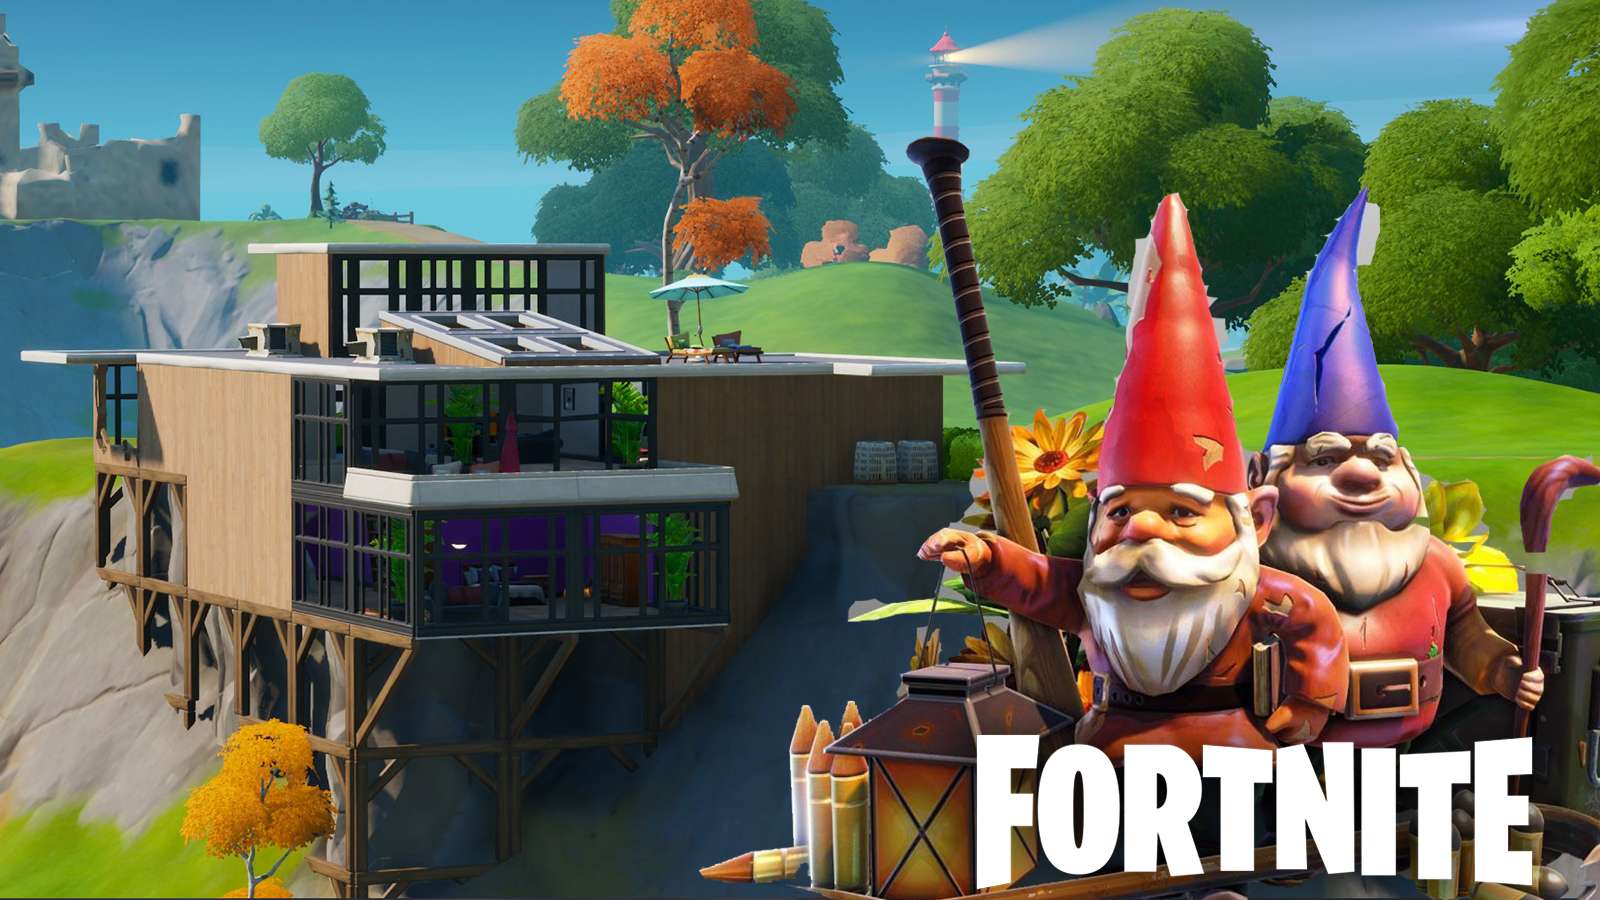 Fortnite gnomes at the Fancy View house.